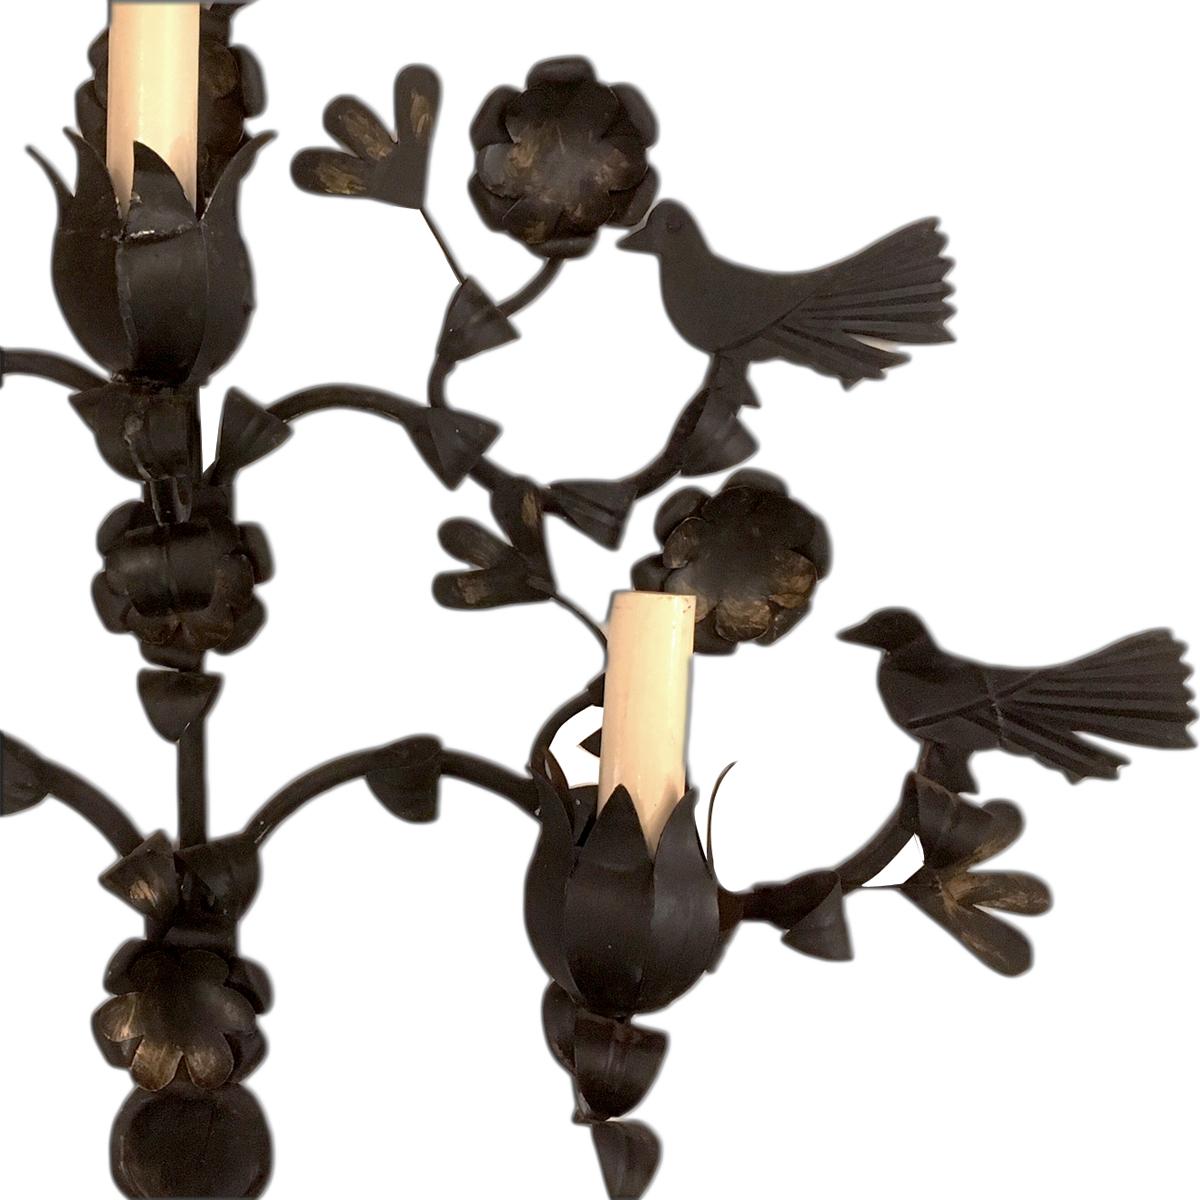 A pair of large circa 1940s American wrought iron sconces with birds and foliage motif. 

Measurements:
Height: 24